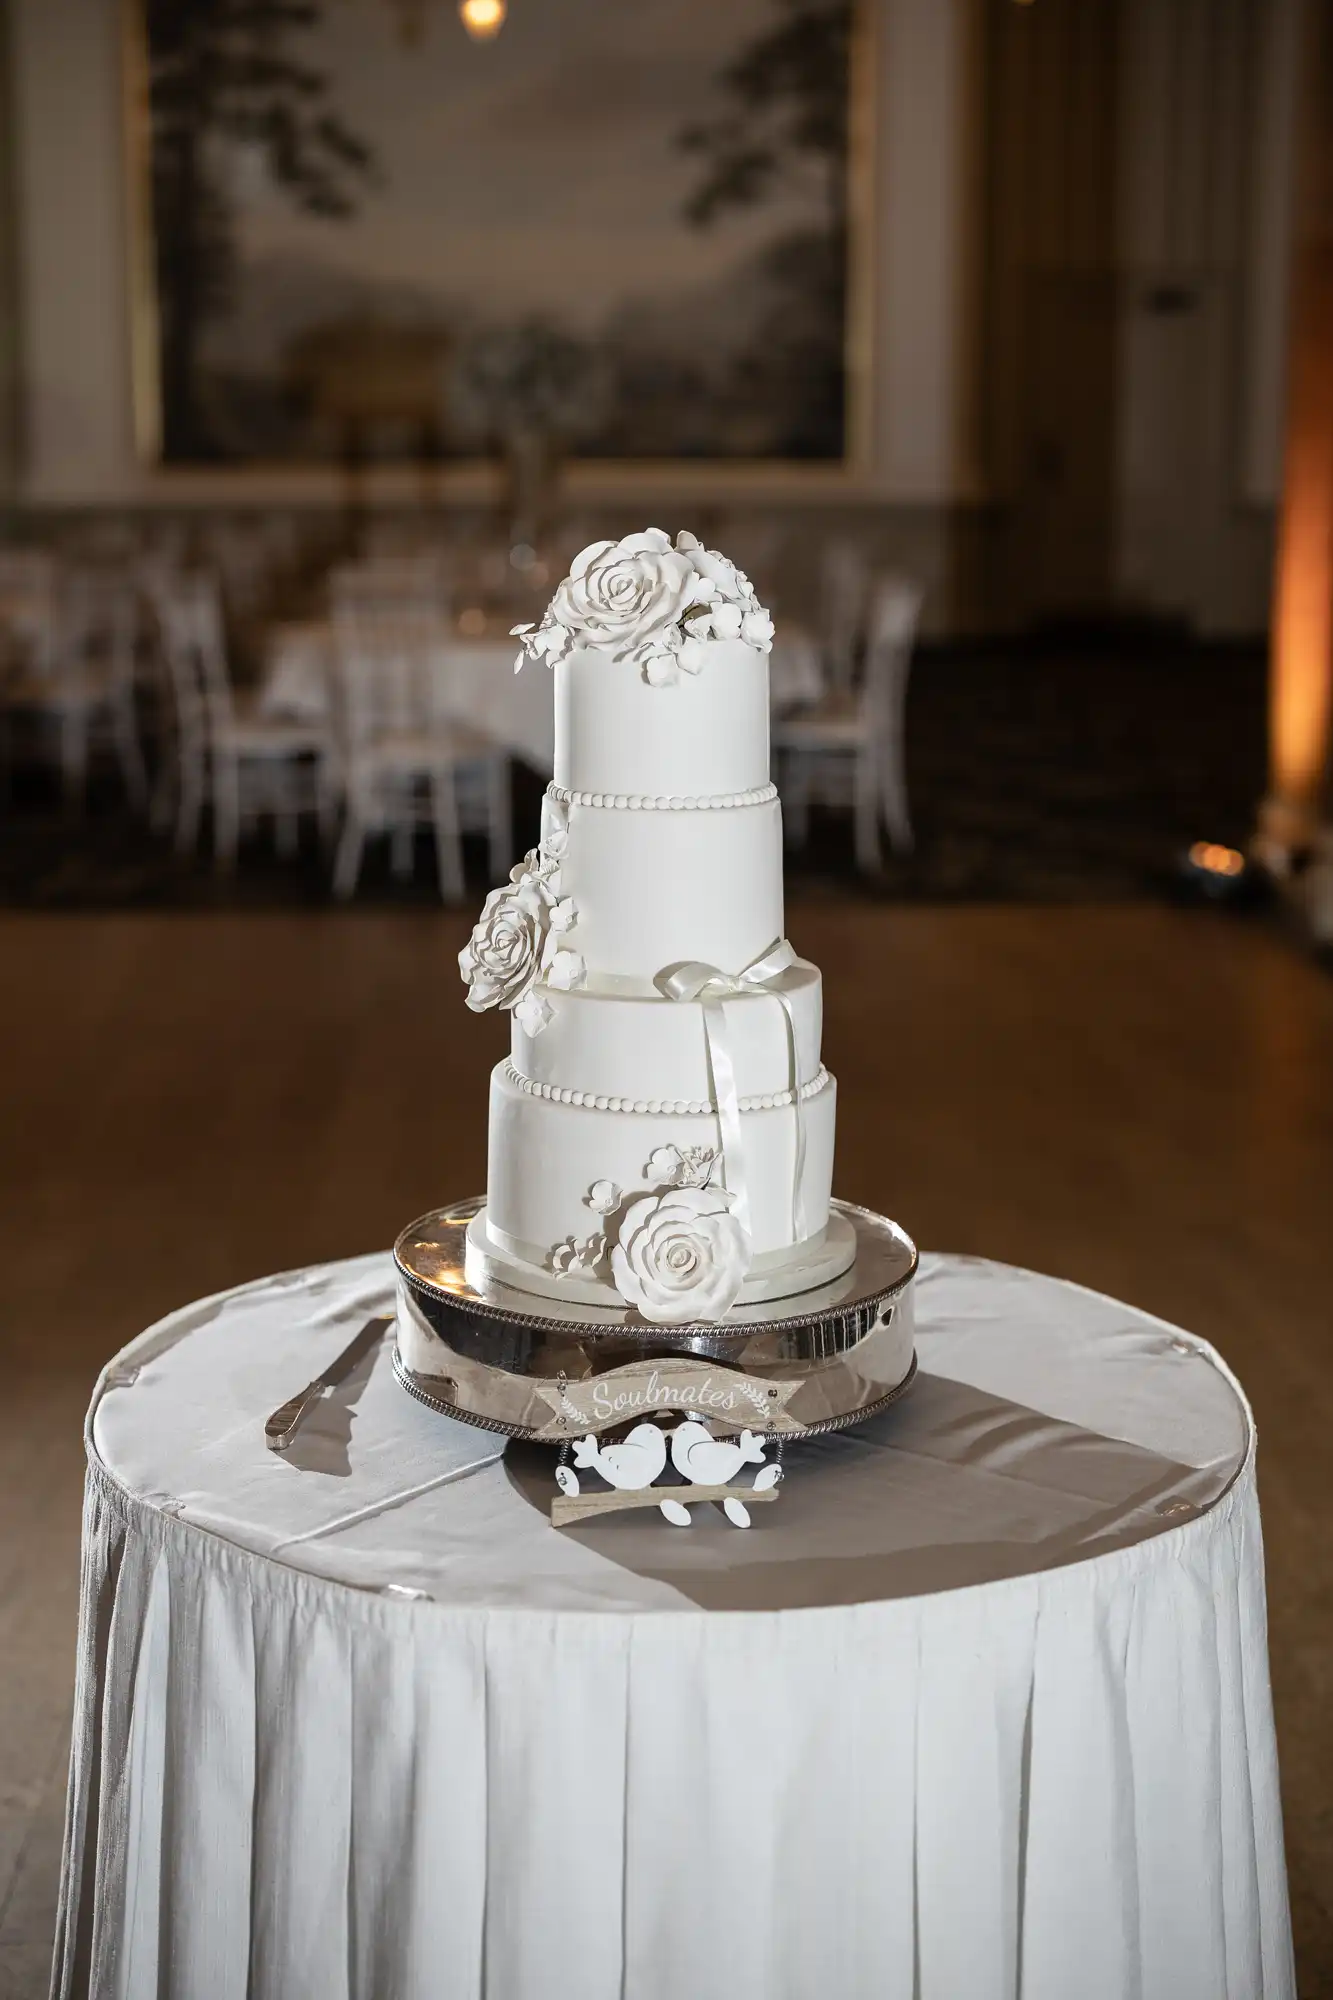 A four-tier white wedding cake with floral and ribbon decorations, displayed on a silver stand on a draped table in an elegant room.